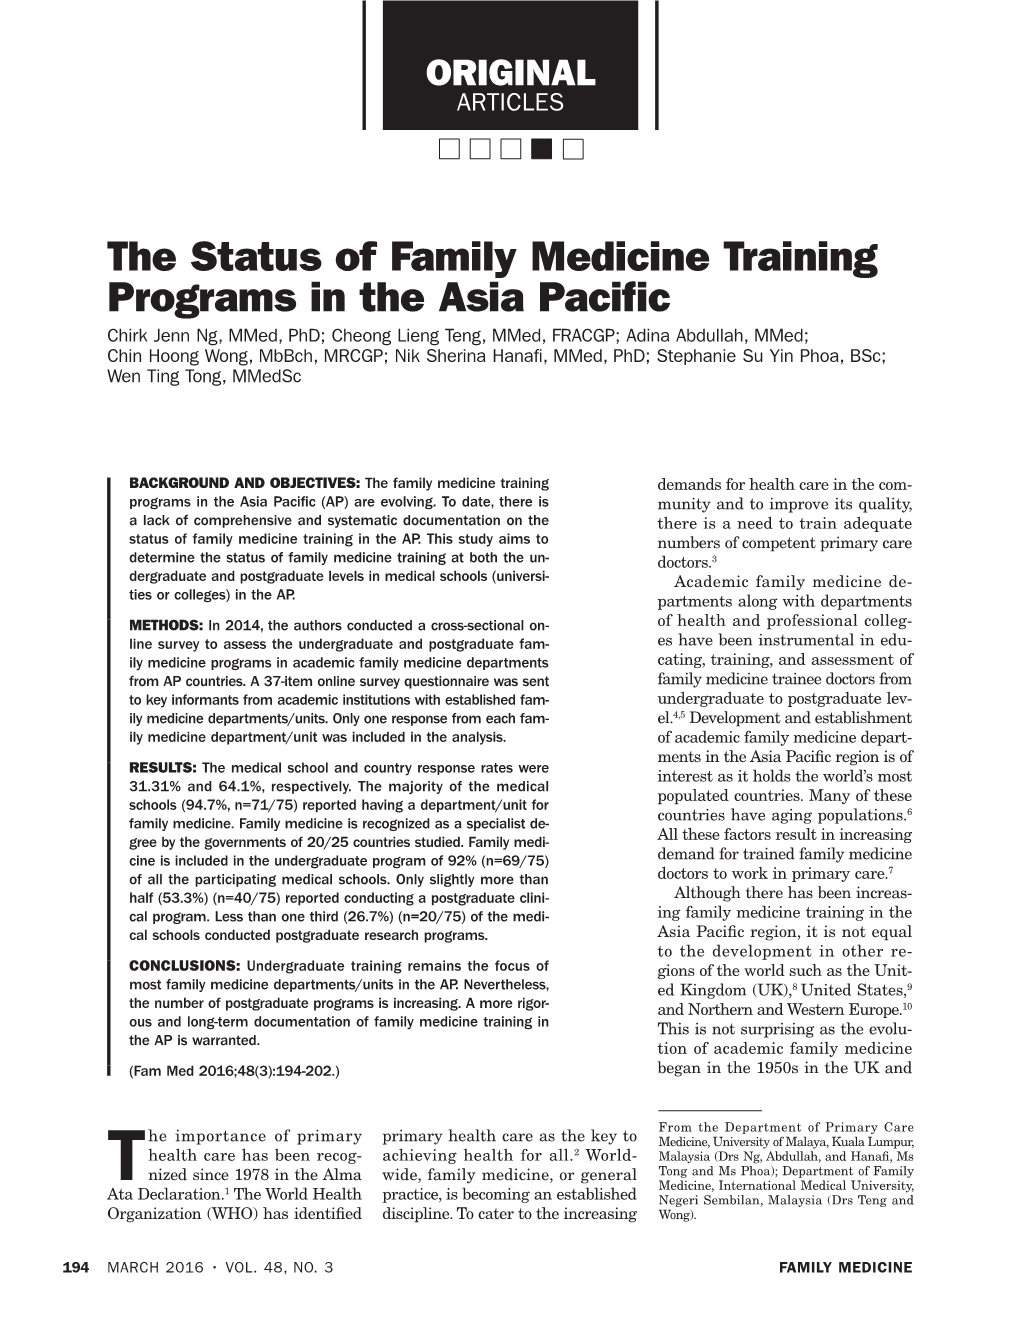 The Status of Family Medicine Training Programs in the Asia Pacific